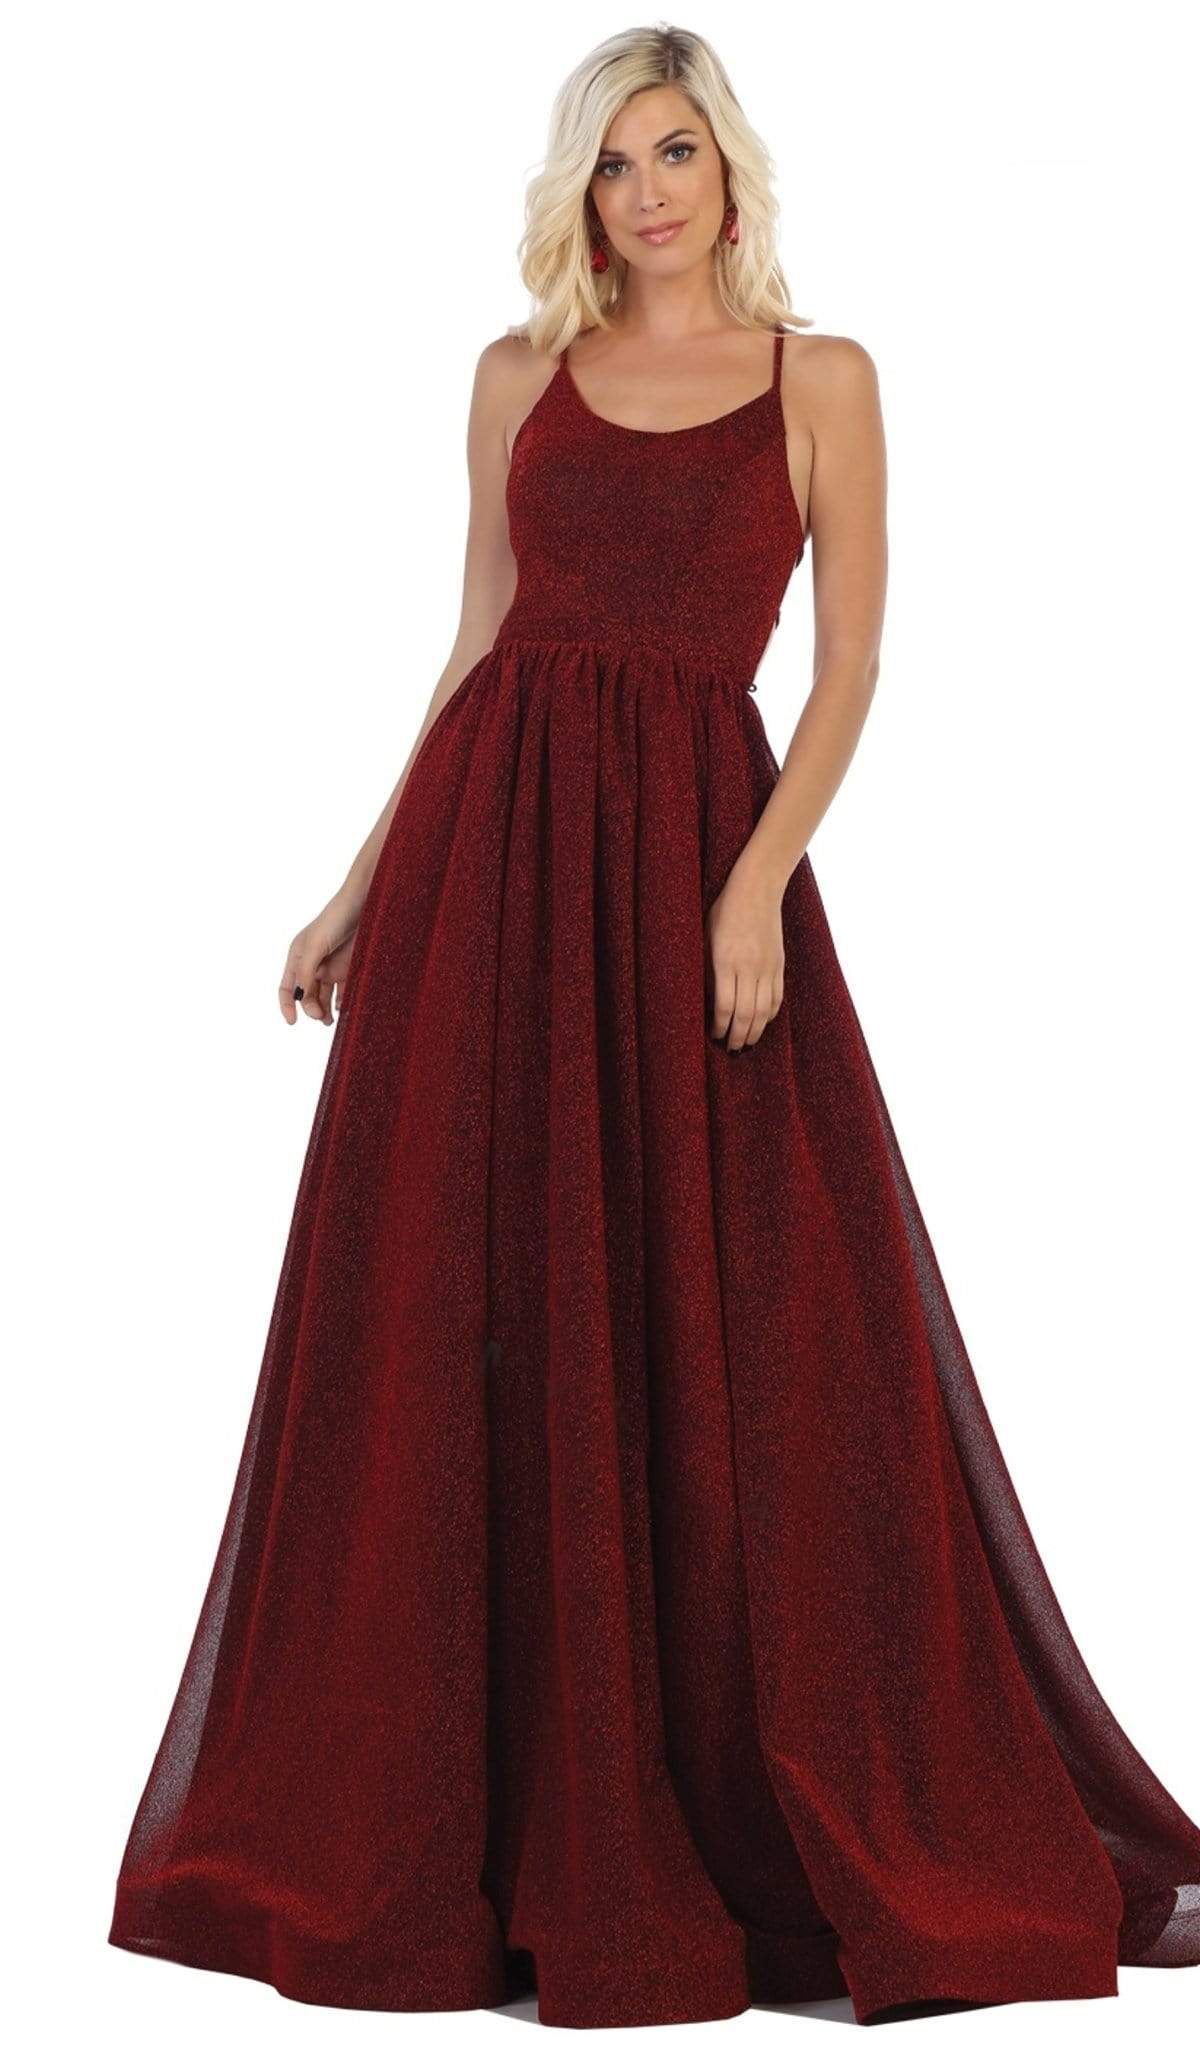 May Queen - RQ7724 Crisscross Strapped Back Ballgown Special Occasion Dress 2 / Burgundy/Multi